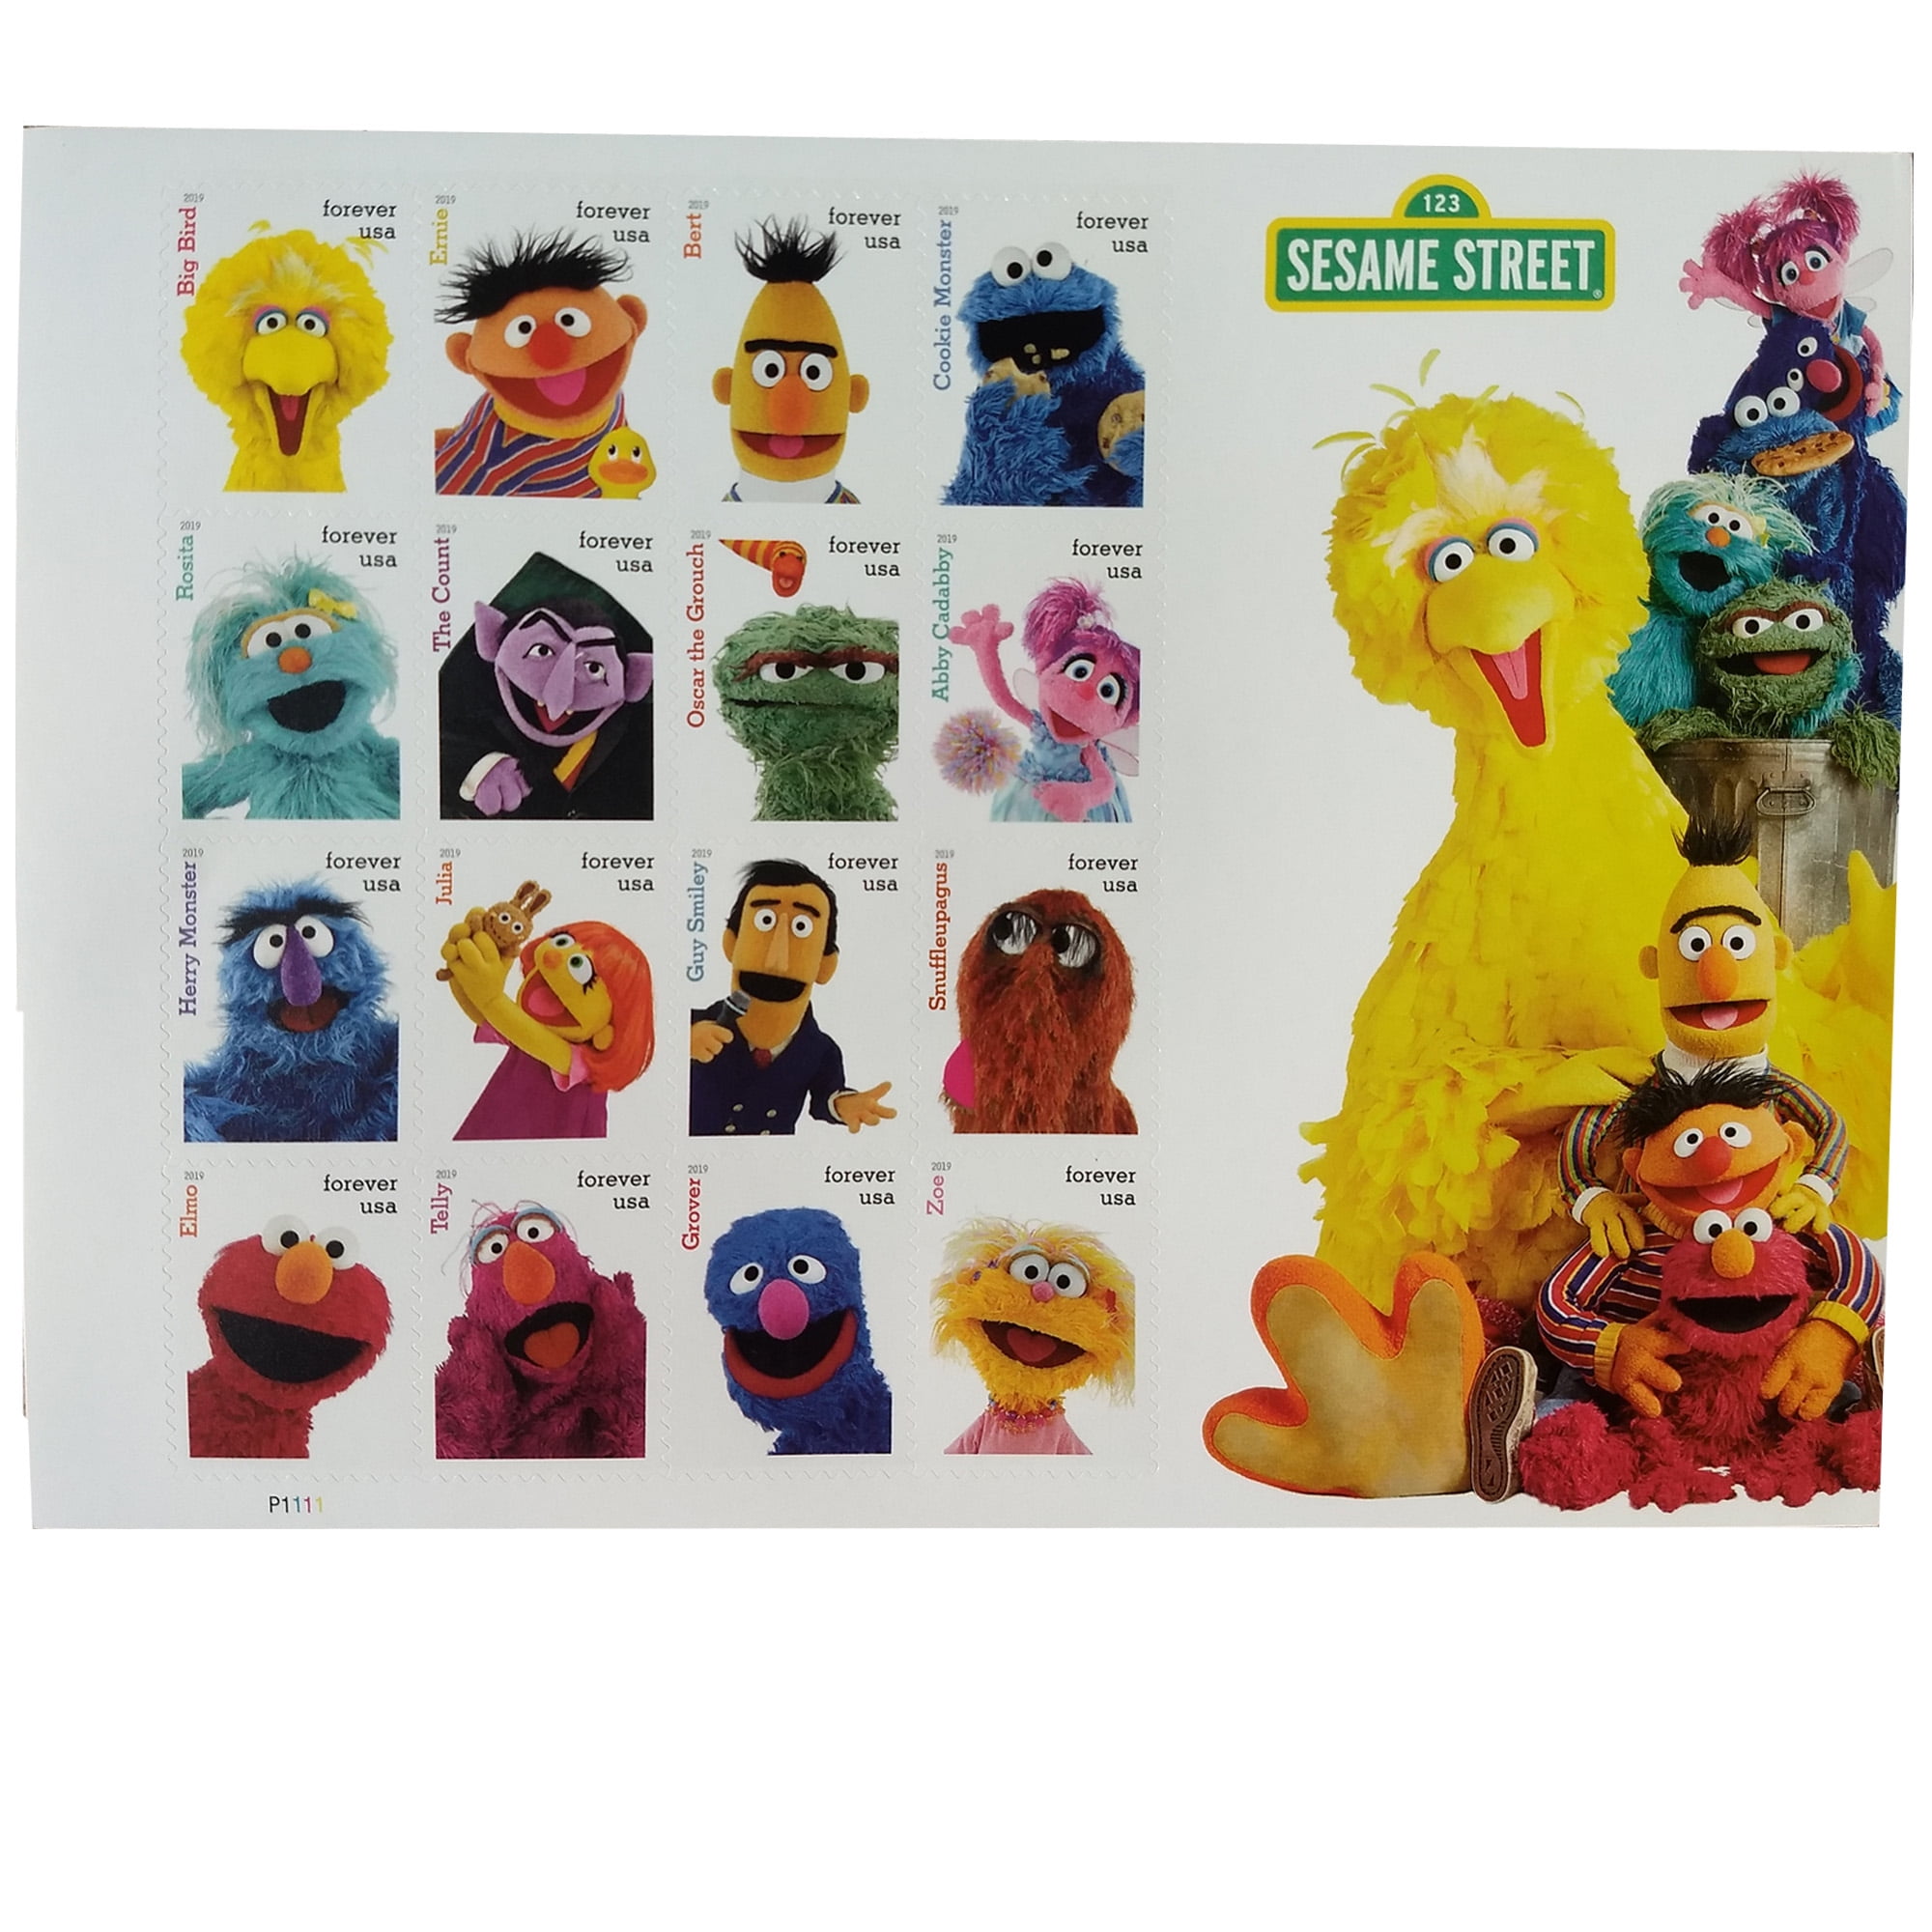 Sesame Street 1 Sheet of 16 USPS First Class Forever Postage Stamps Wedding Celebration